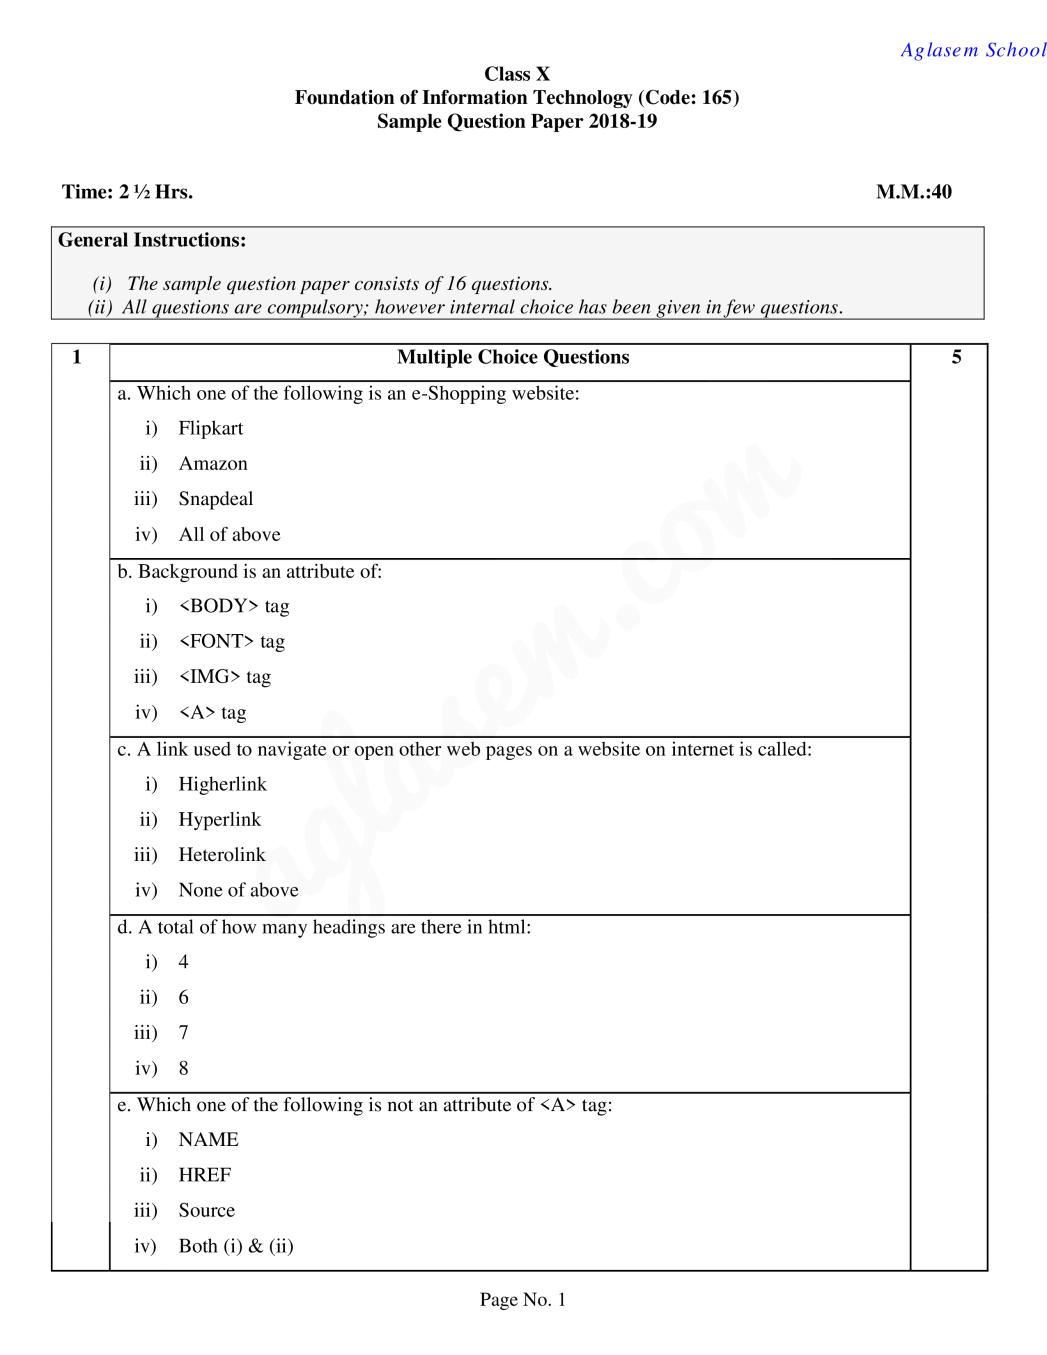 CBSE Class 10 Sample Paper 2019 for Foundation of Information Technology - Page 1